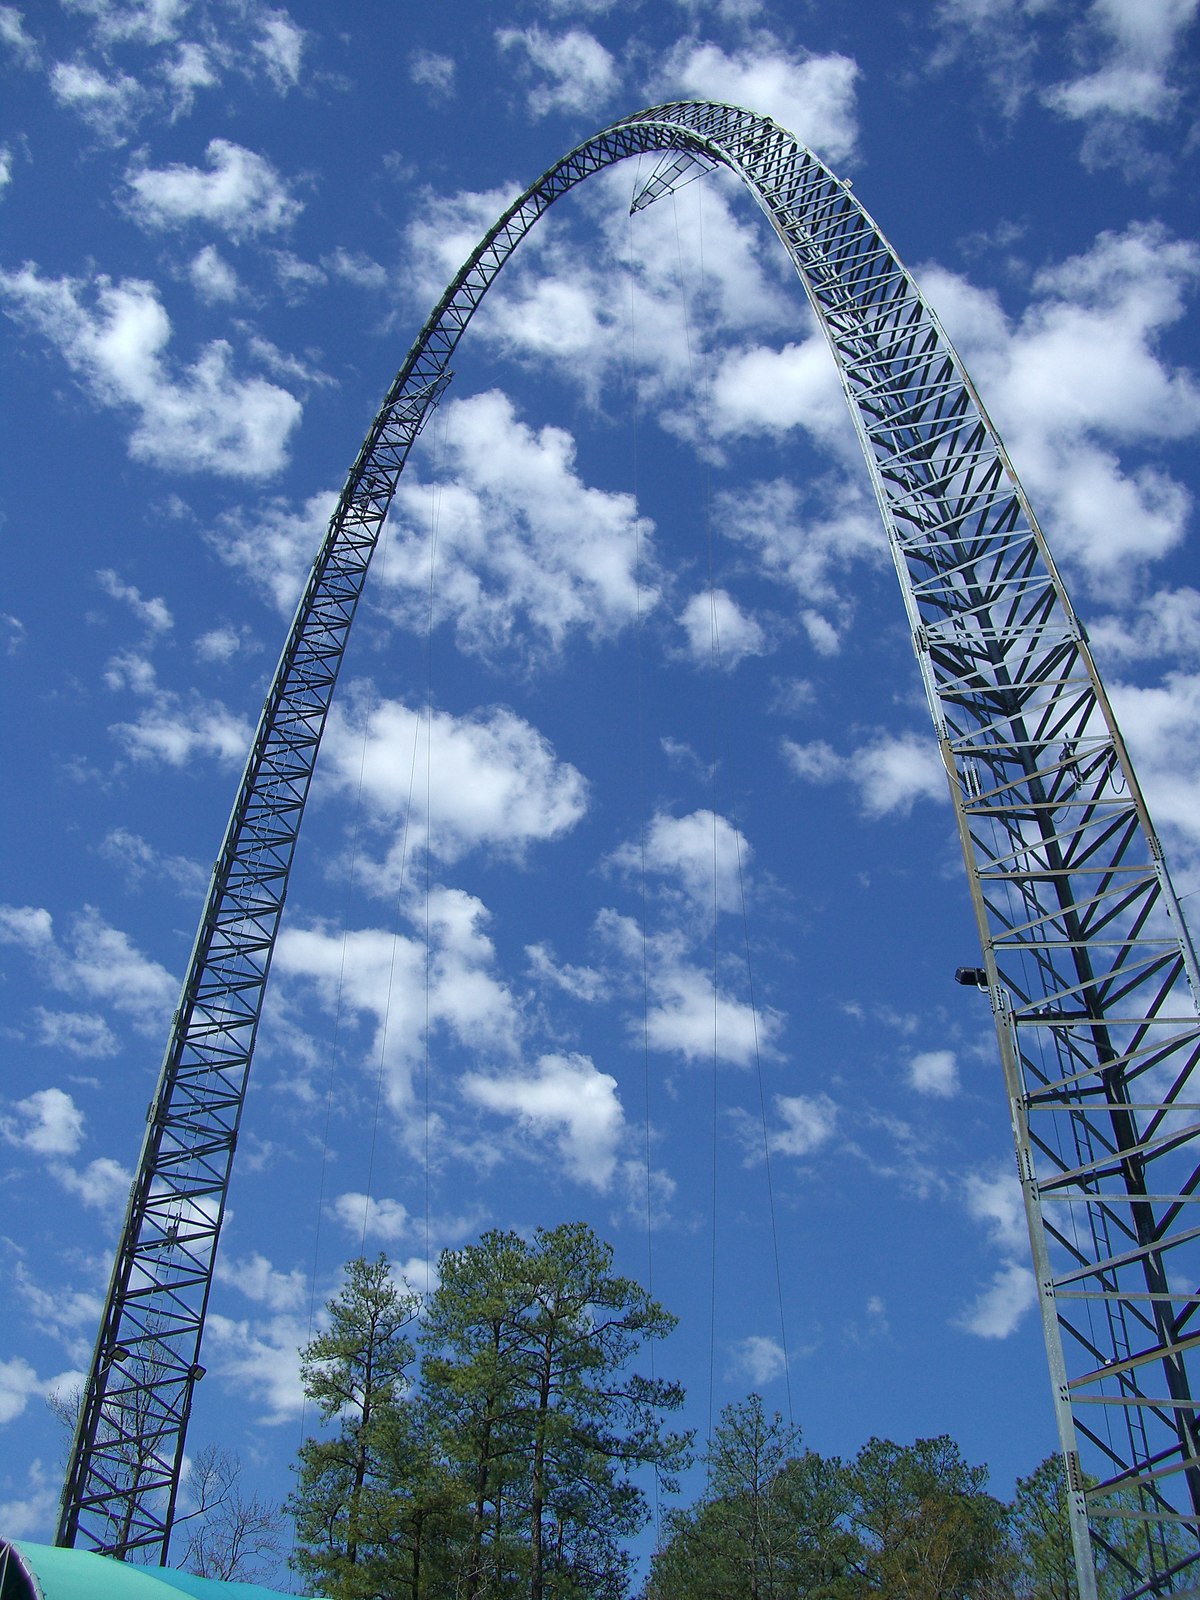 The Ups and Downs of the Sales Roller Coaster - HSI